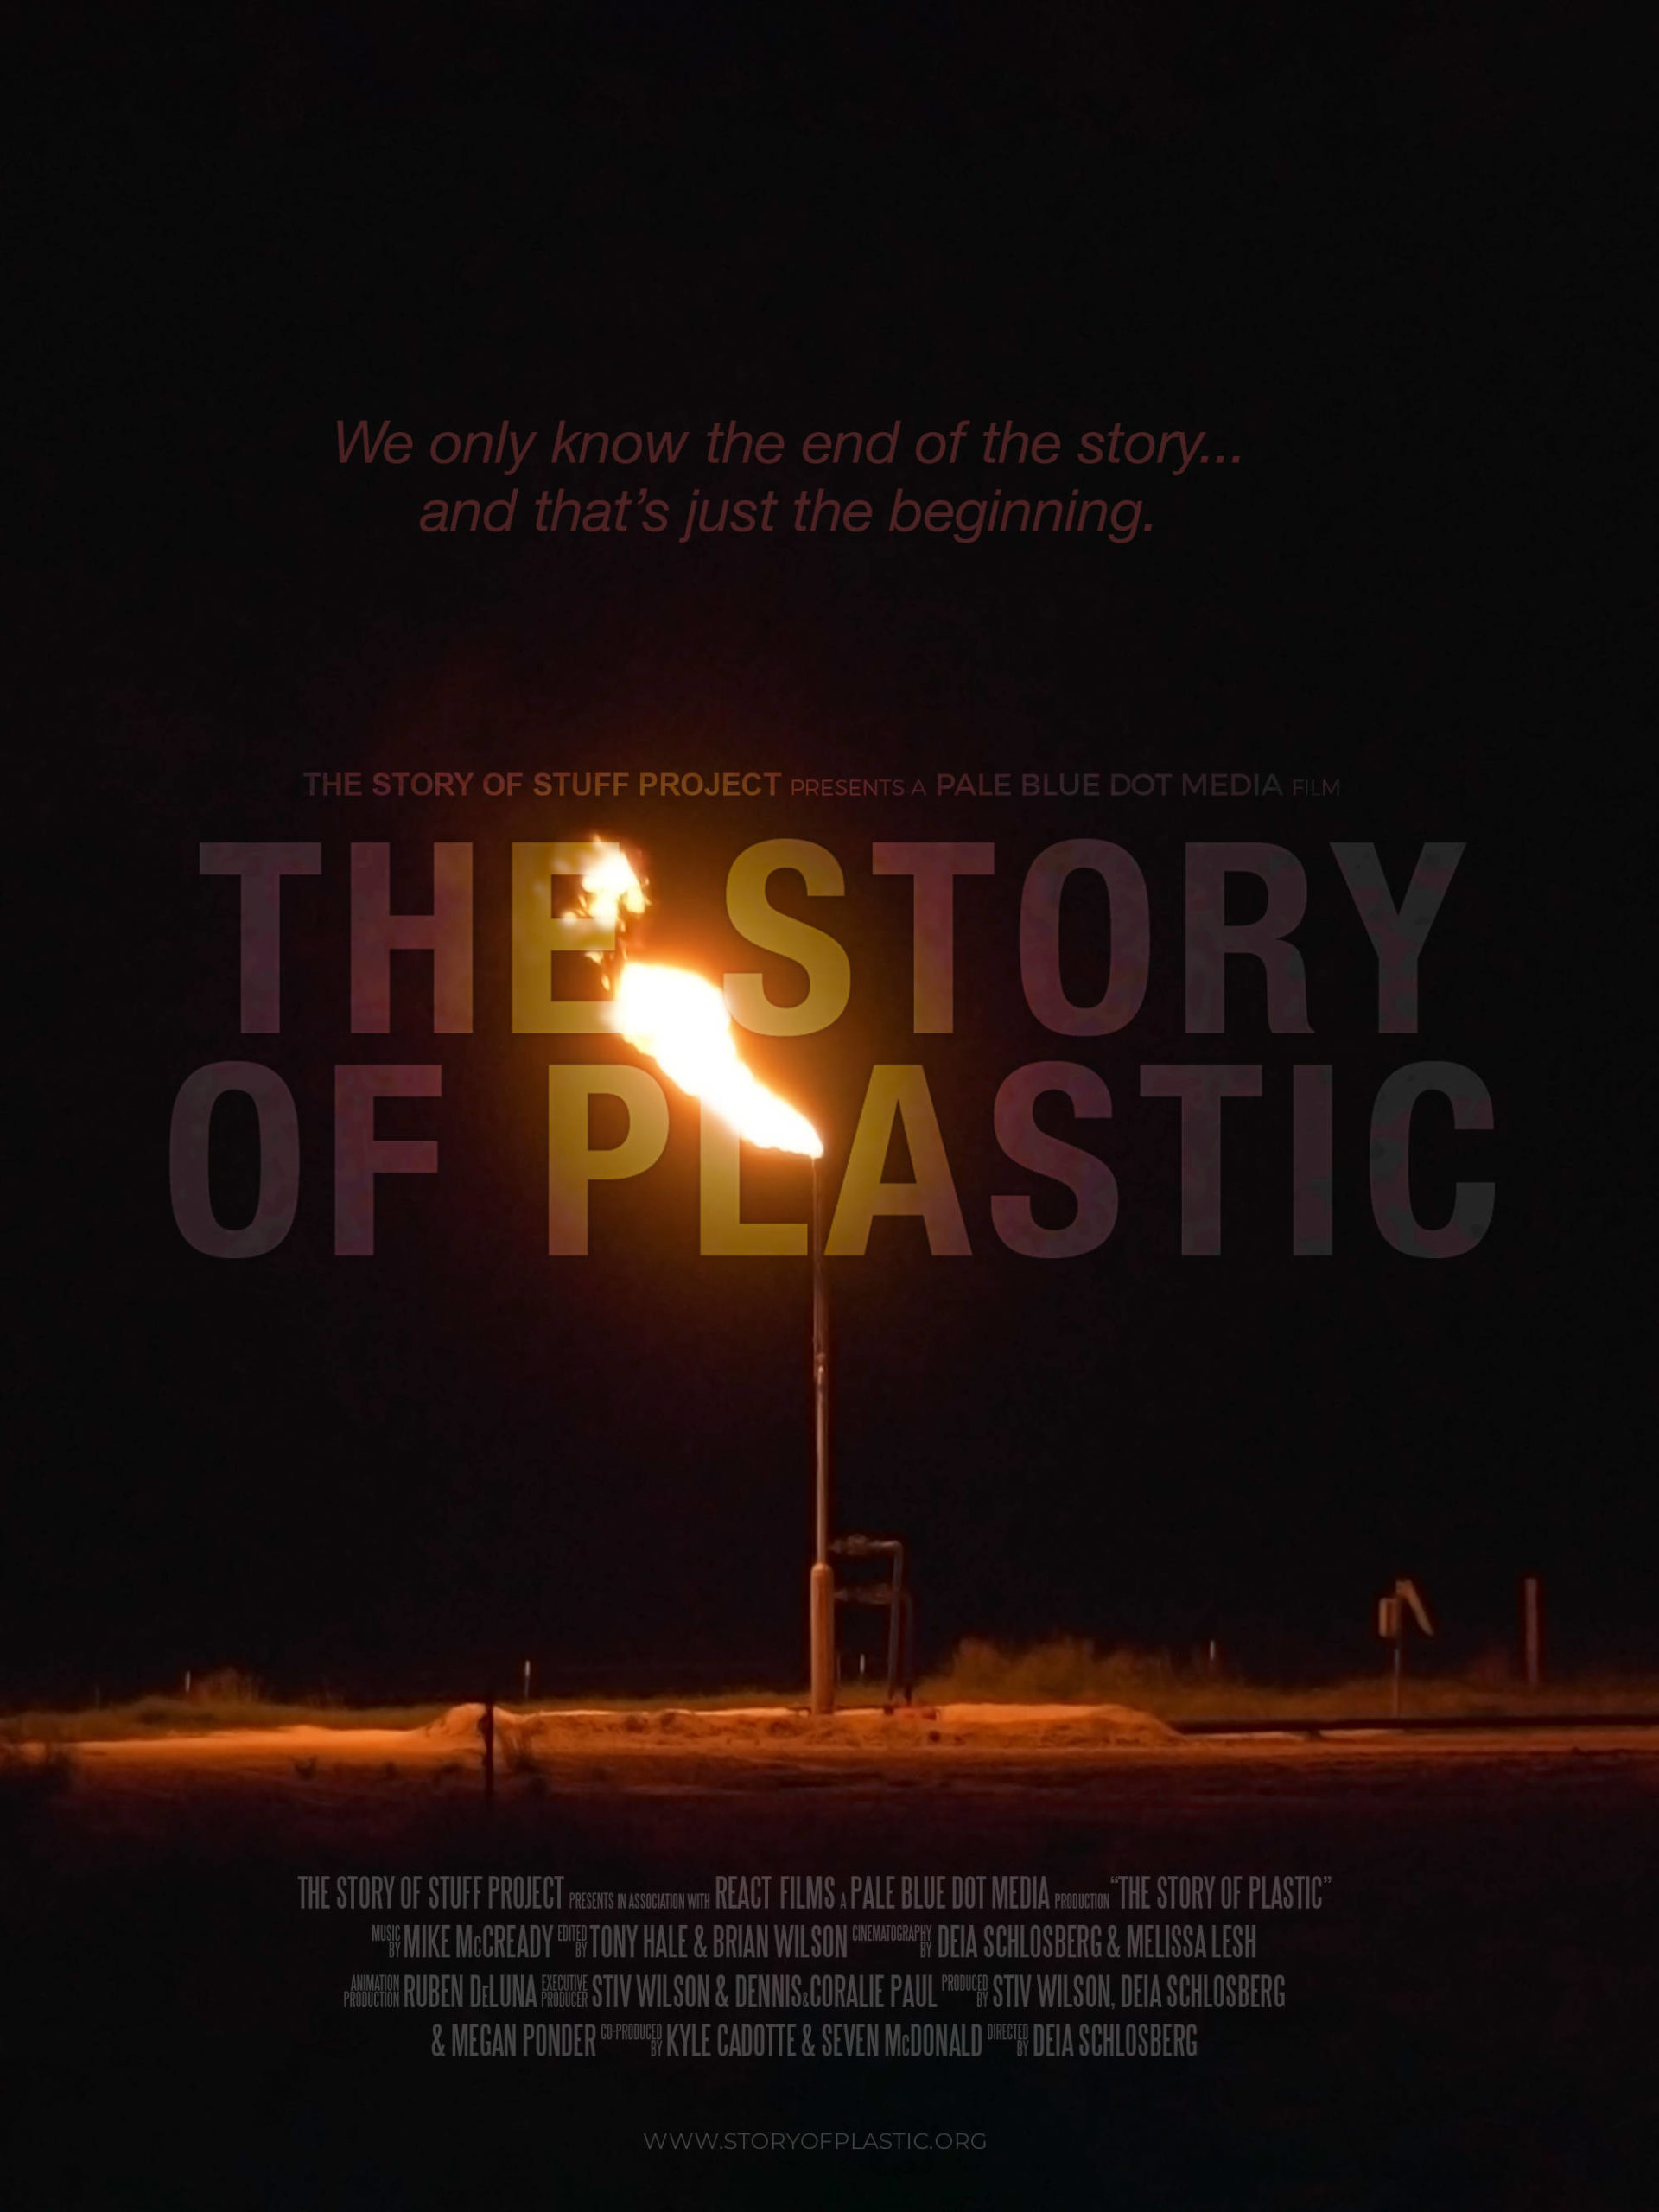 FHFF virtual cinema presents “The Story of Plastic”